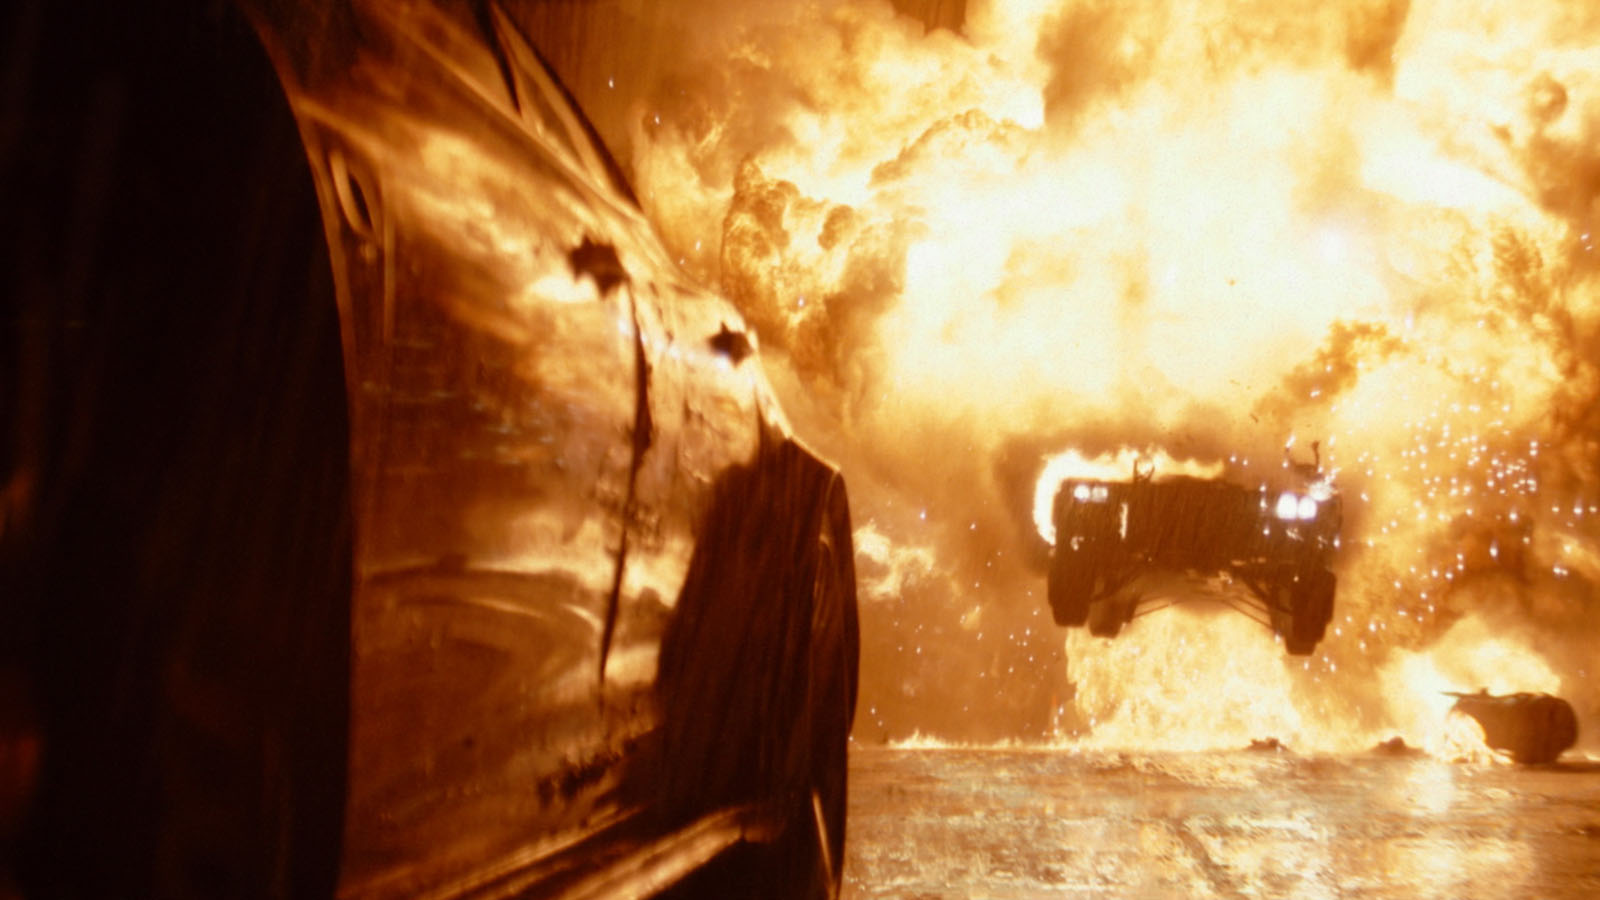 The Batmobile emerges from the fire behind Penguin’s fleeing vehicle. Image © Warner Bros.